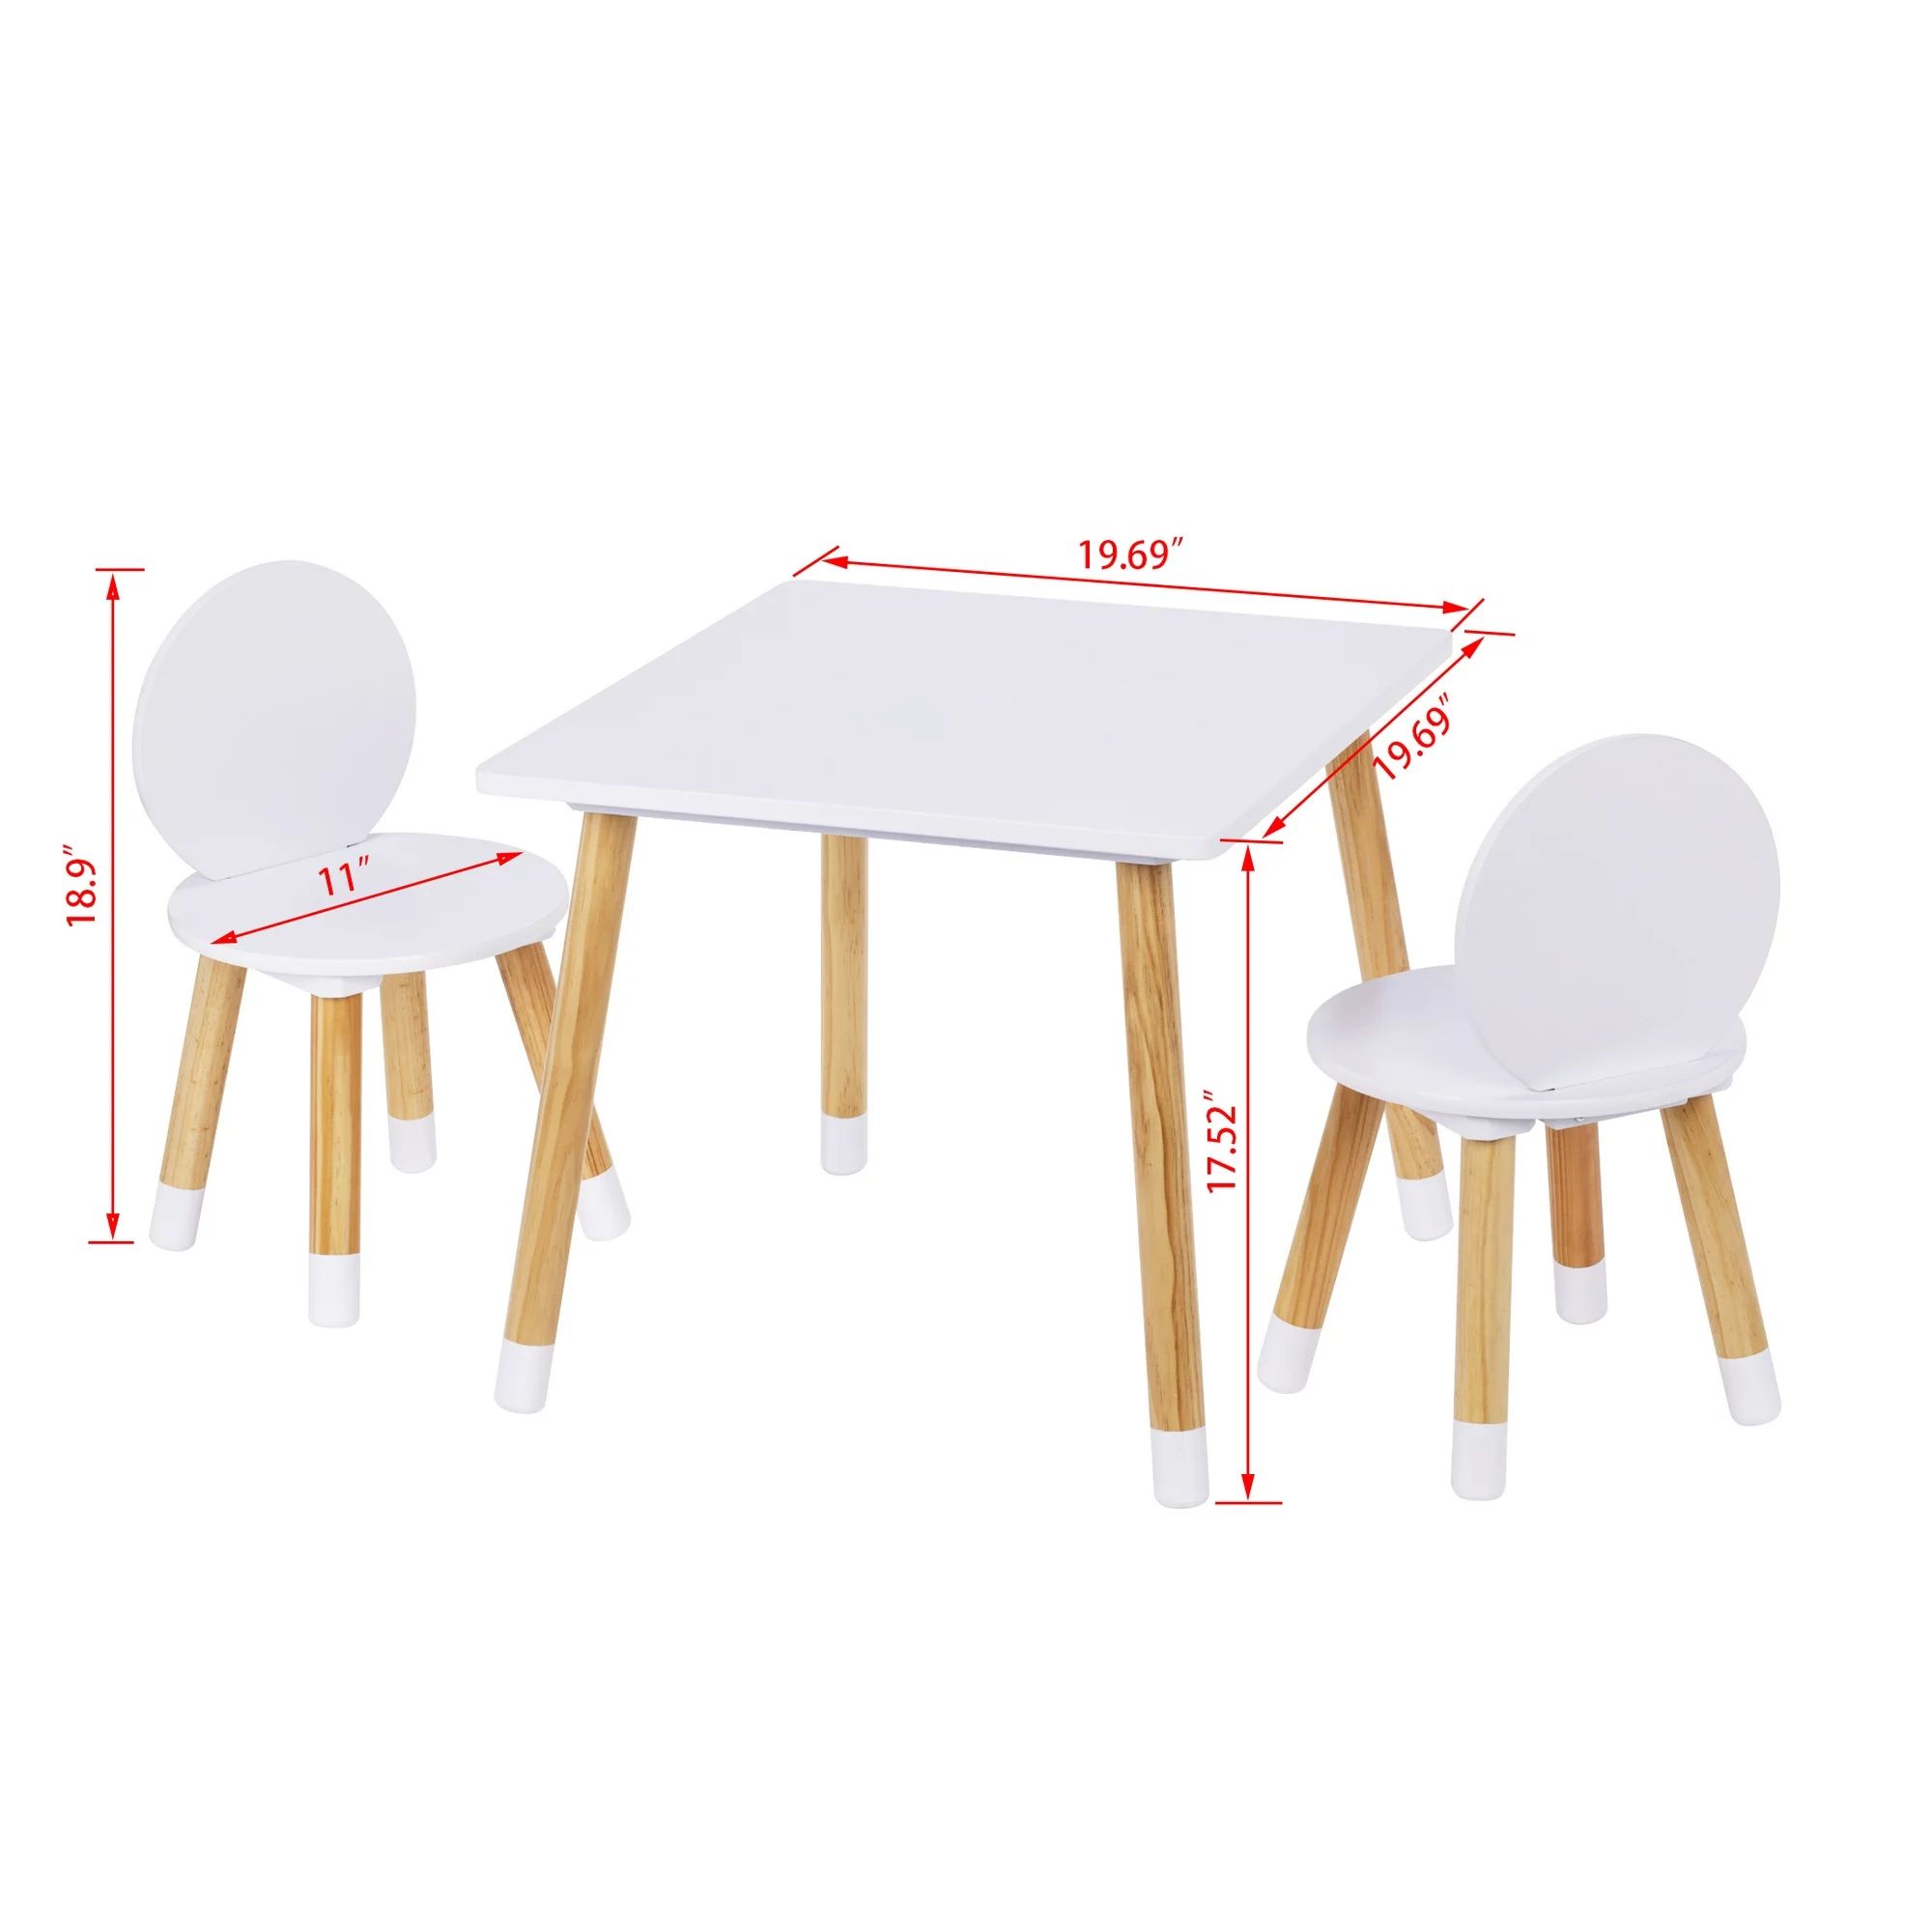 UTEX 2-in-1 Kids Table with 2 Chairs Set, White | Walmart (US)